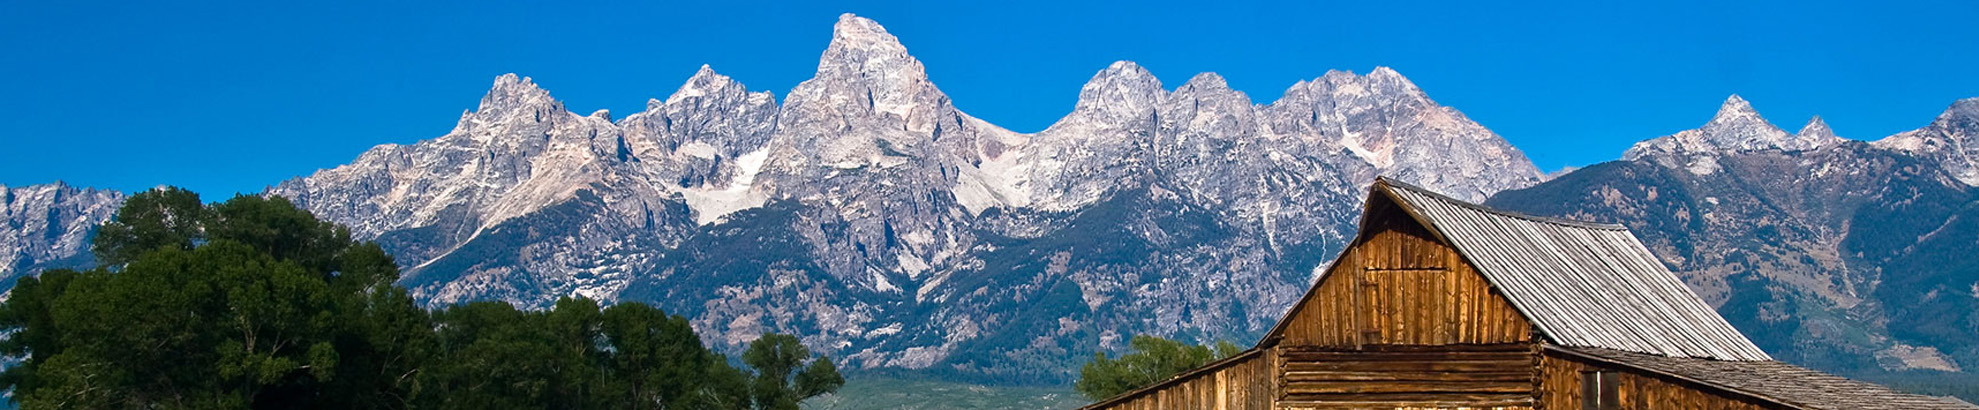 Tetons with cabin in foreground